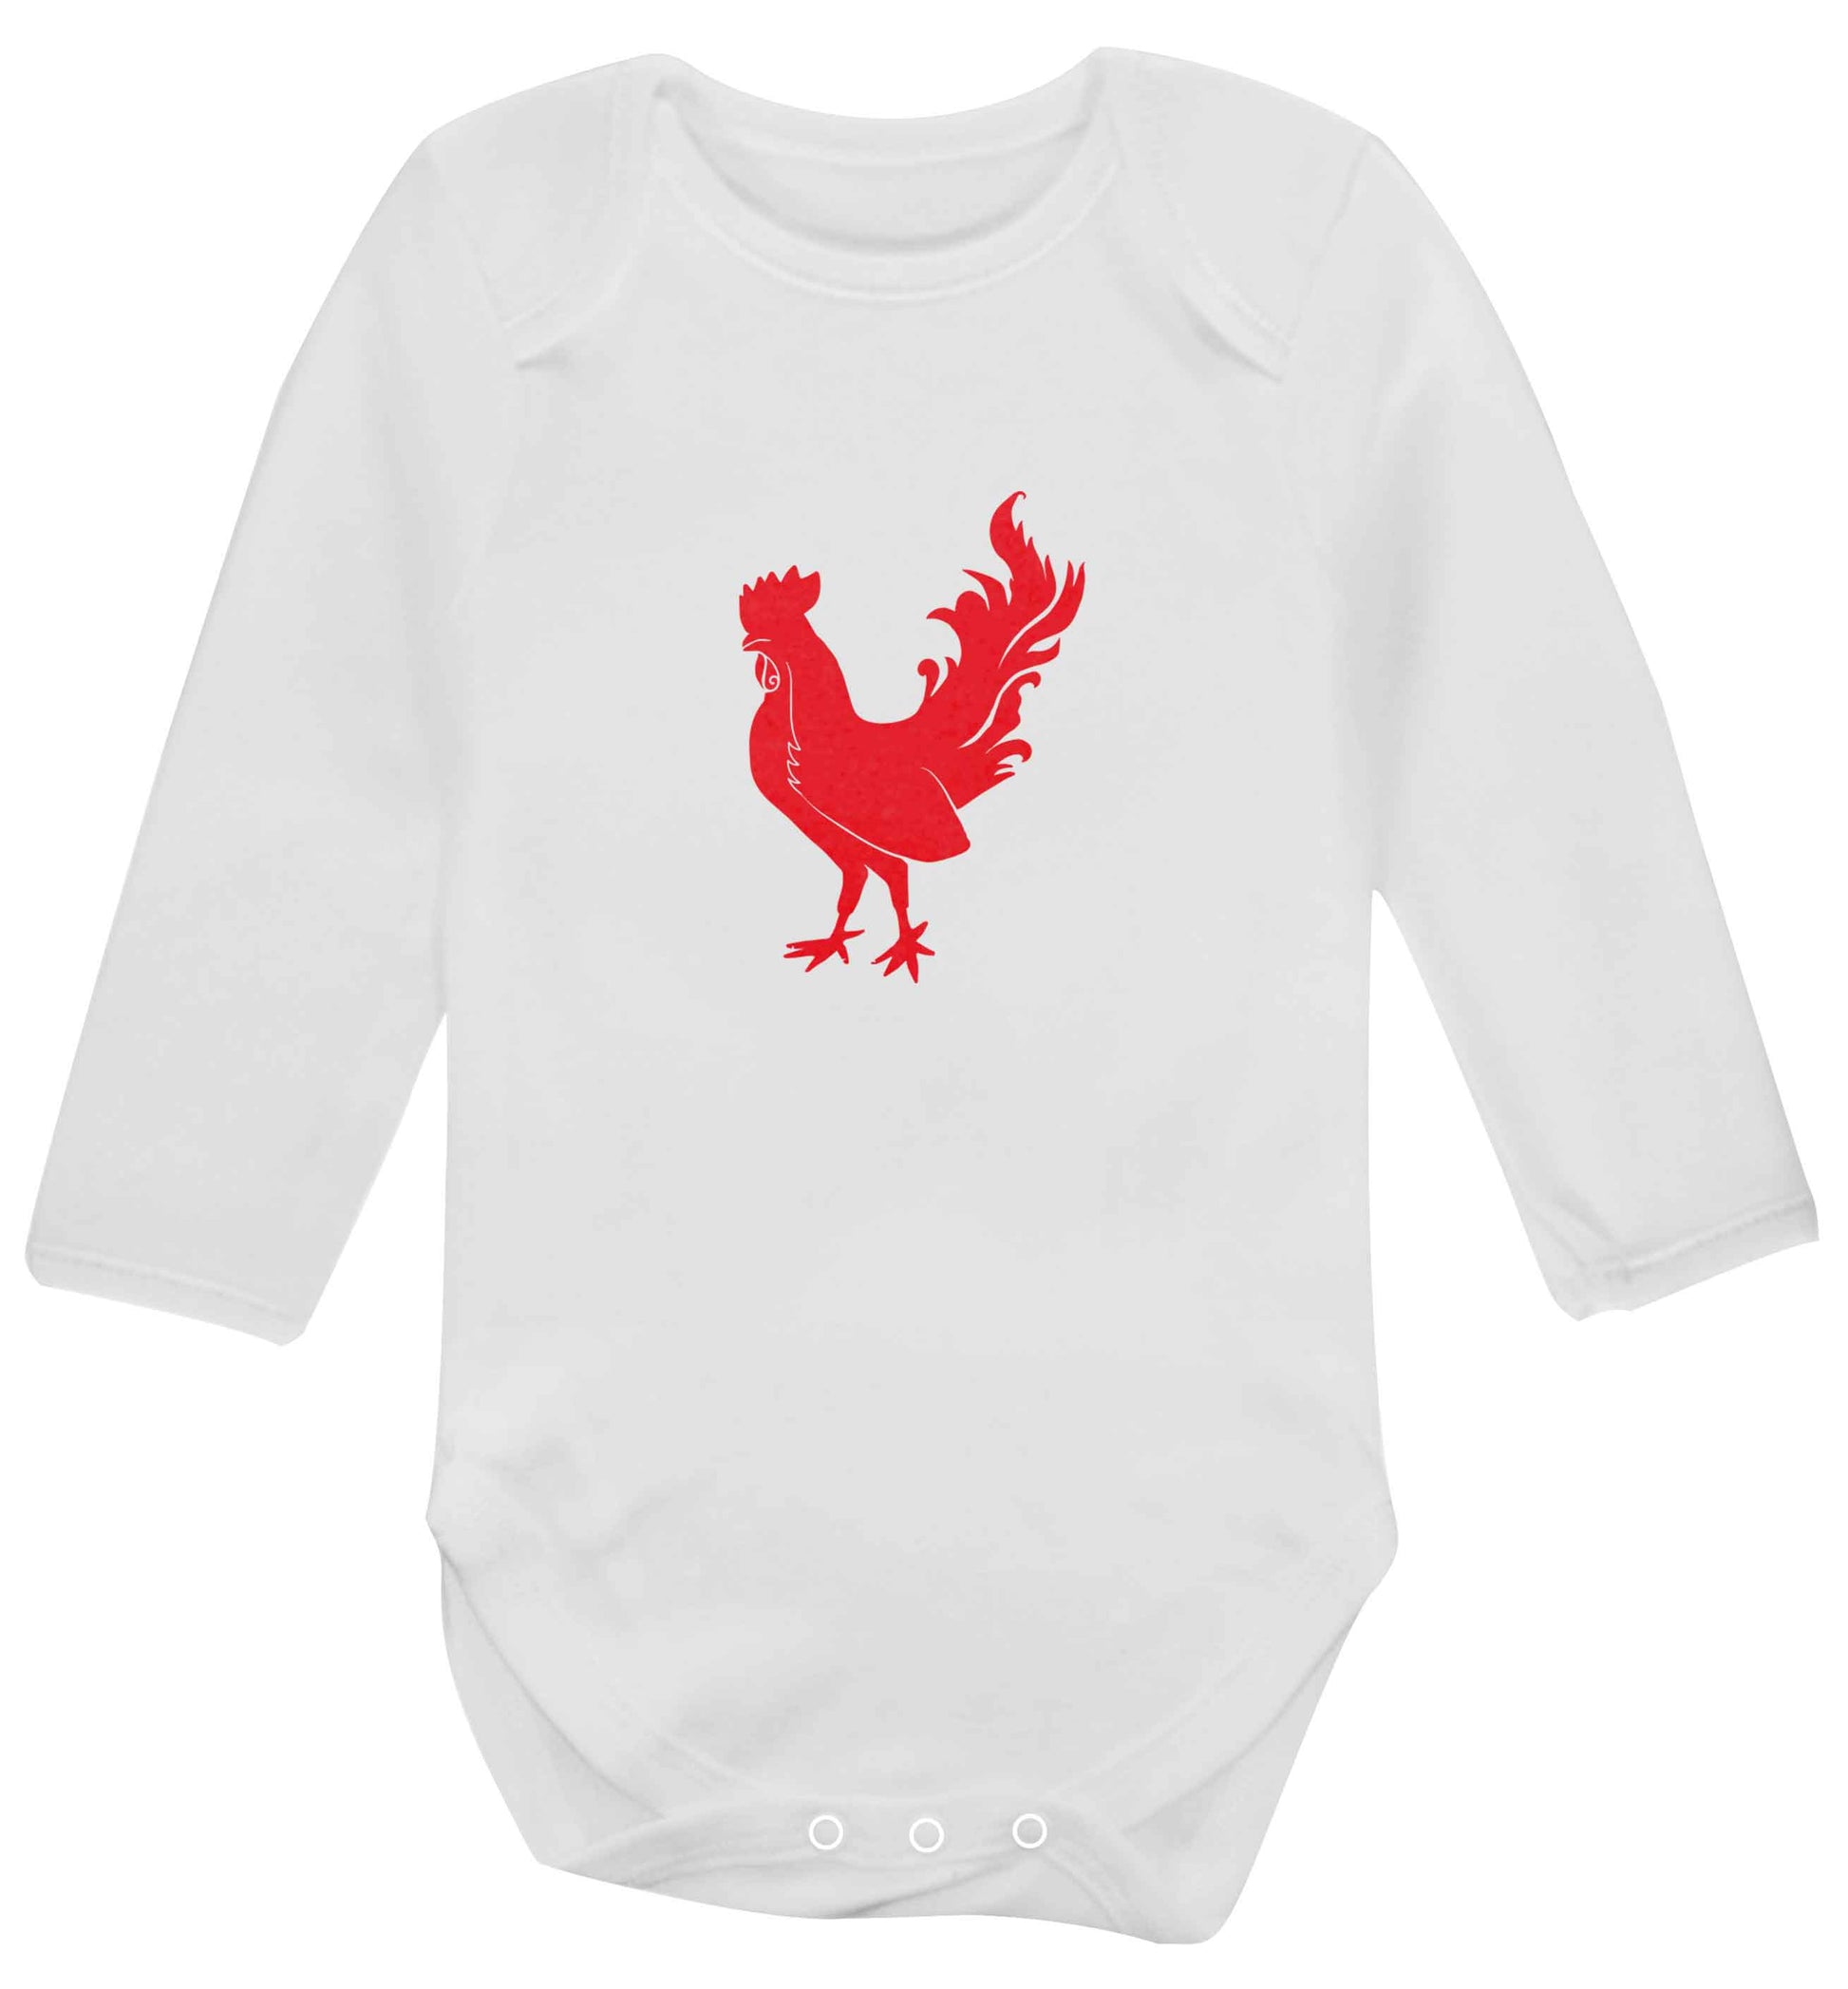 Rooster baby vest long sleeved white 6-12 months